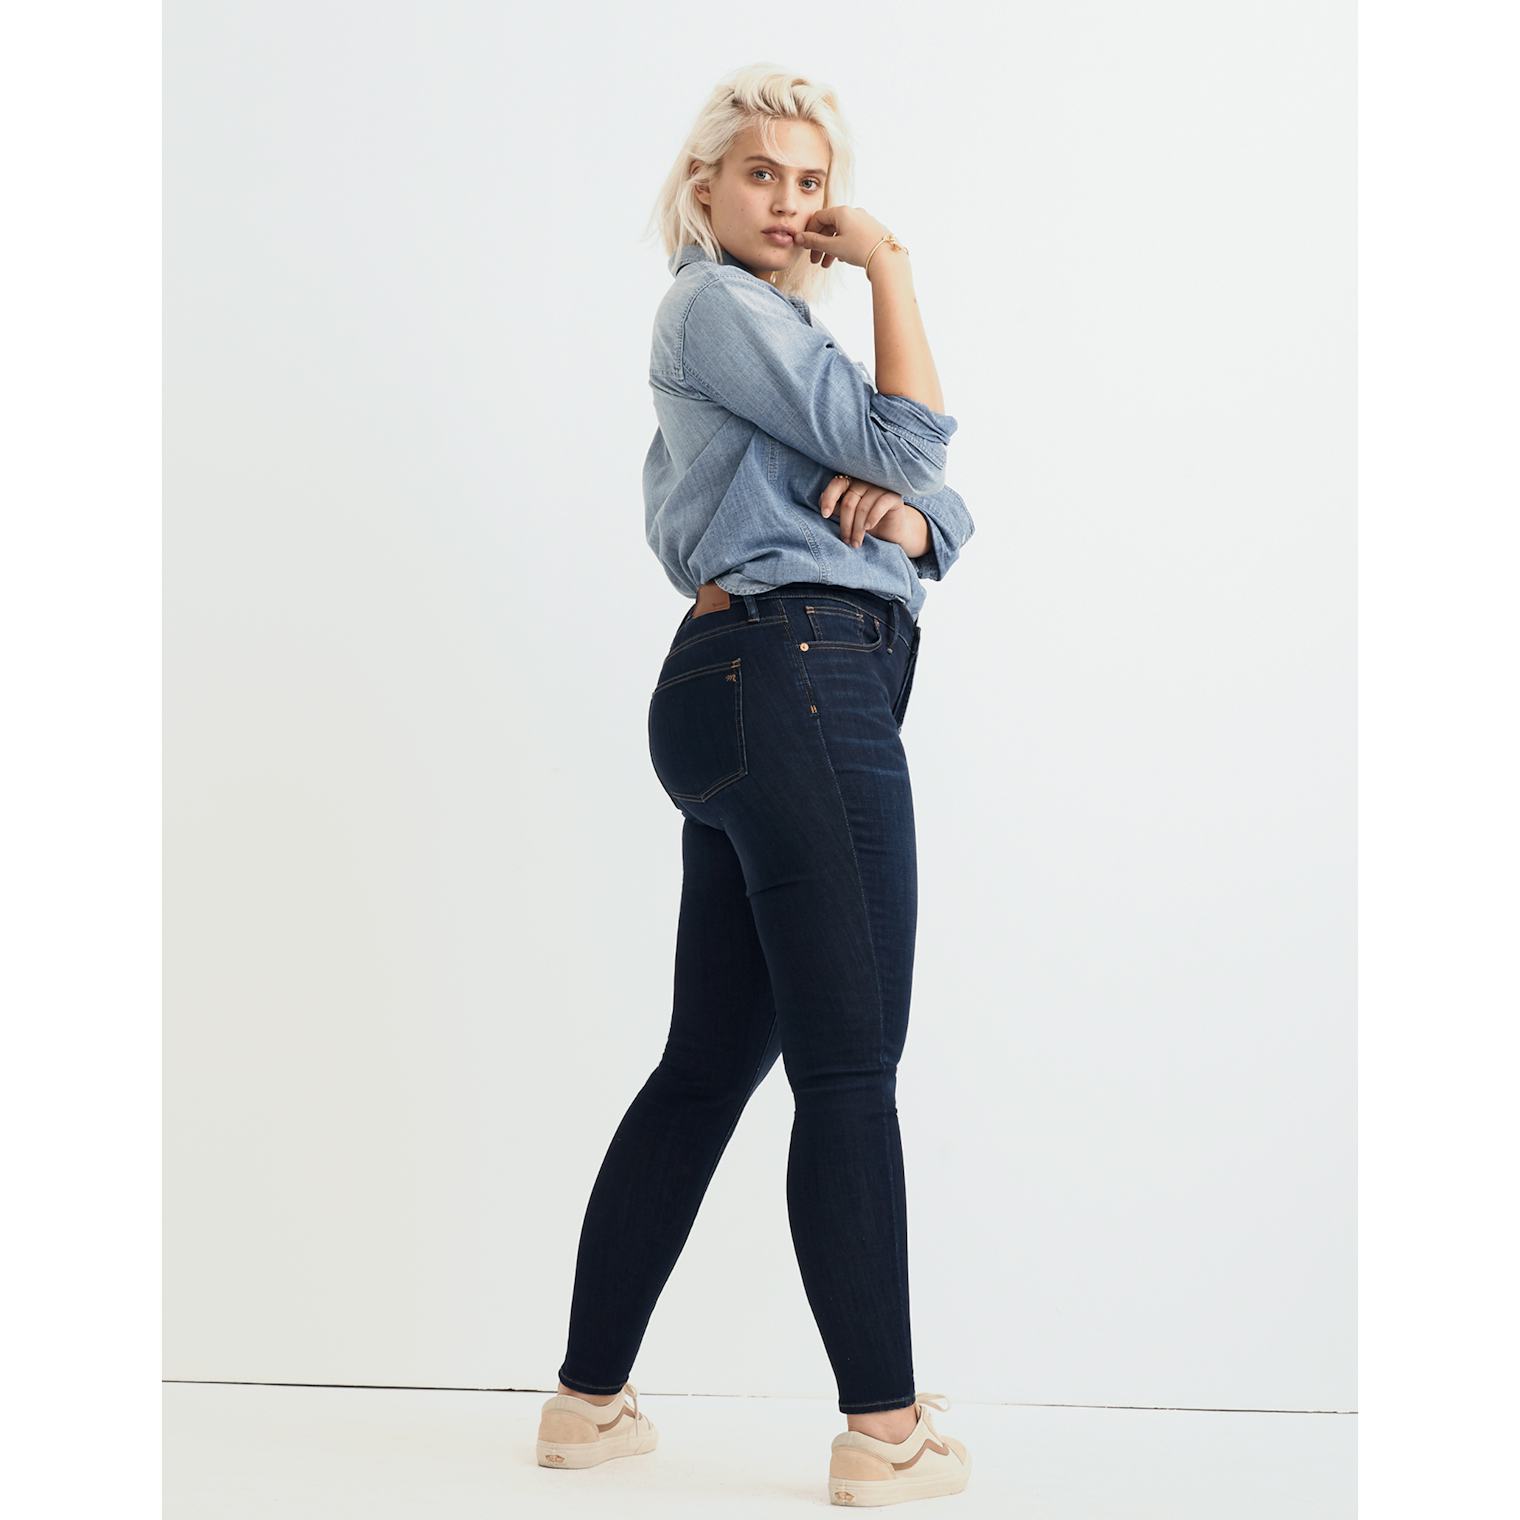 What Is Madewell's New Extended Sizing? The New Standard Will Make Plus ...